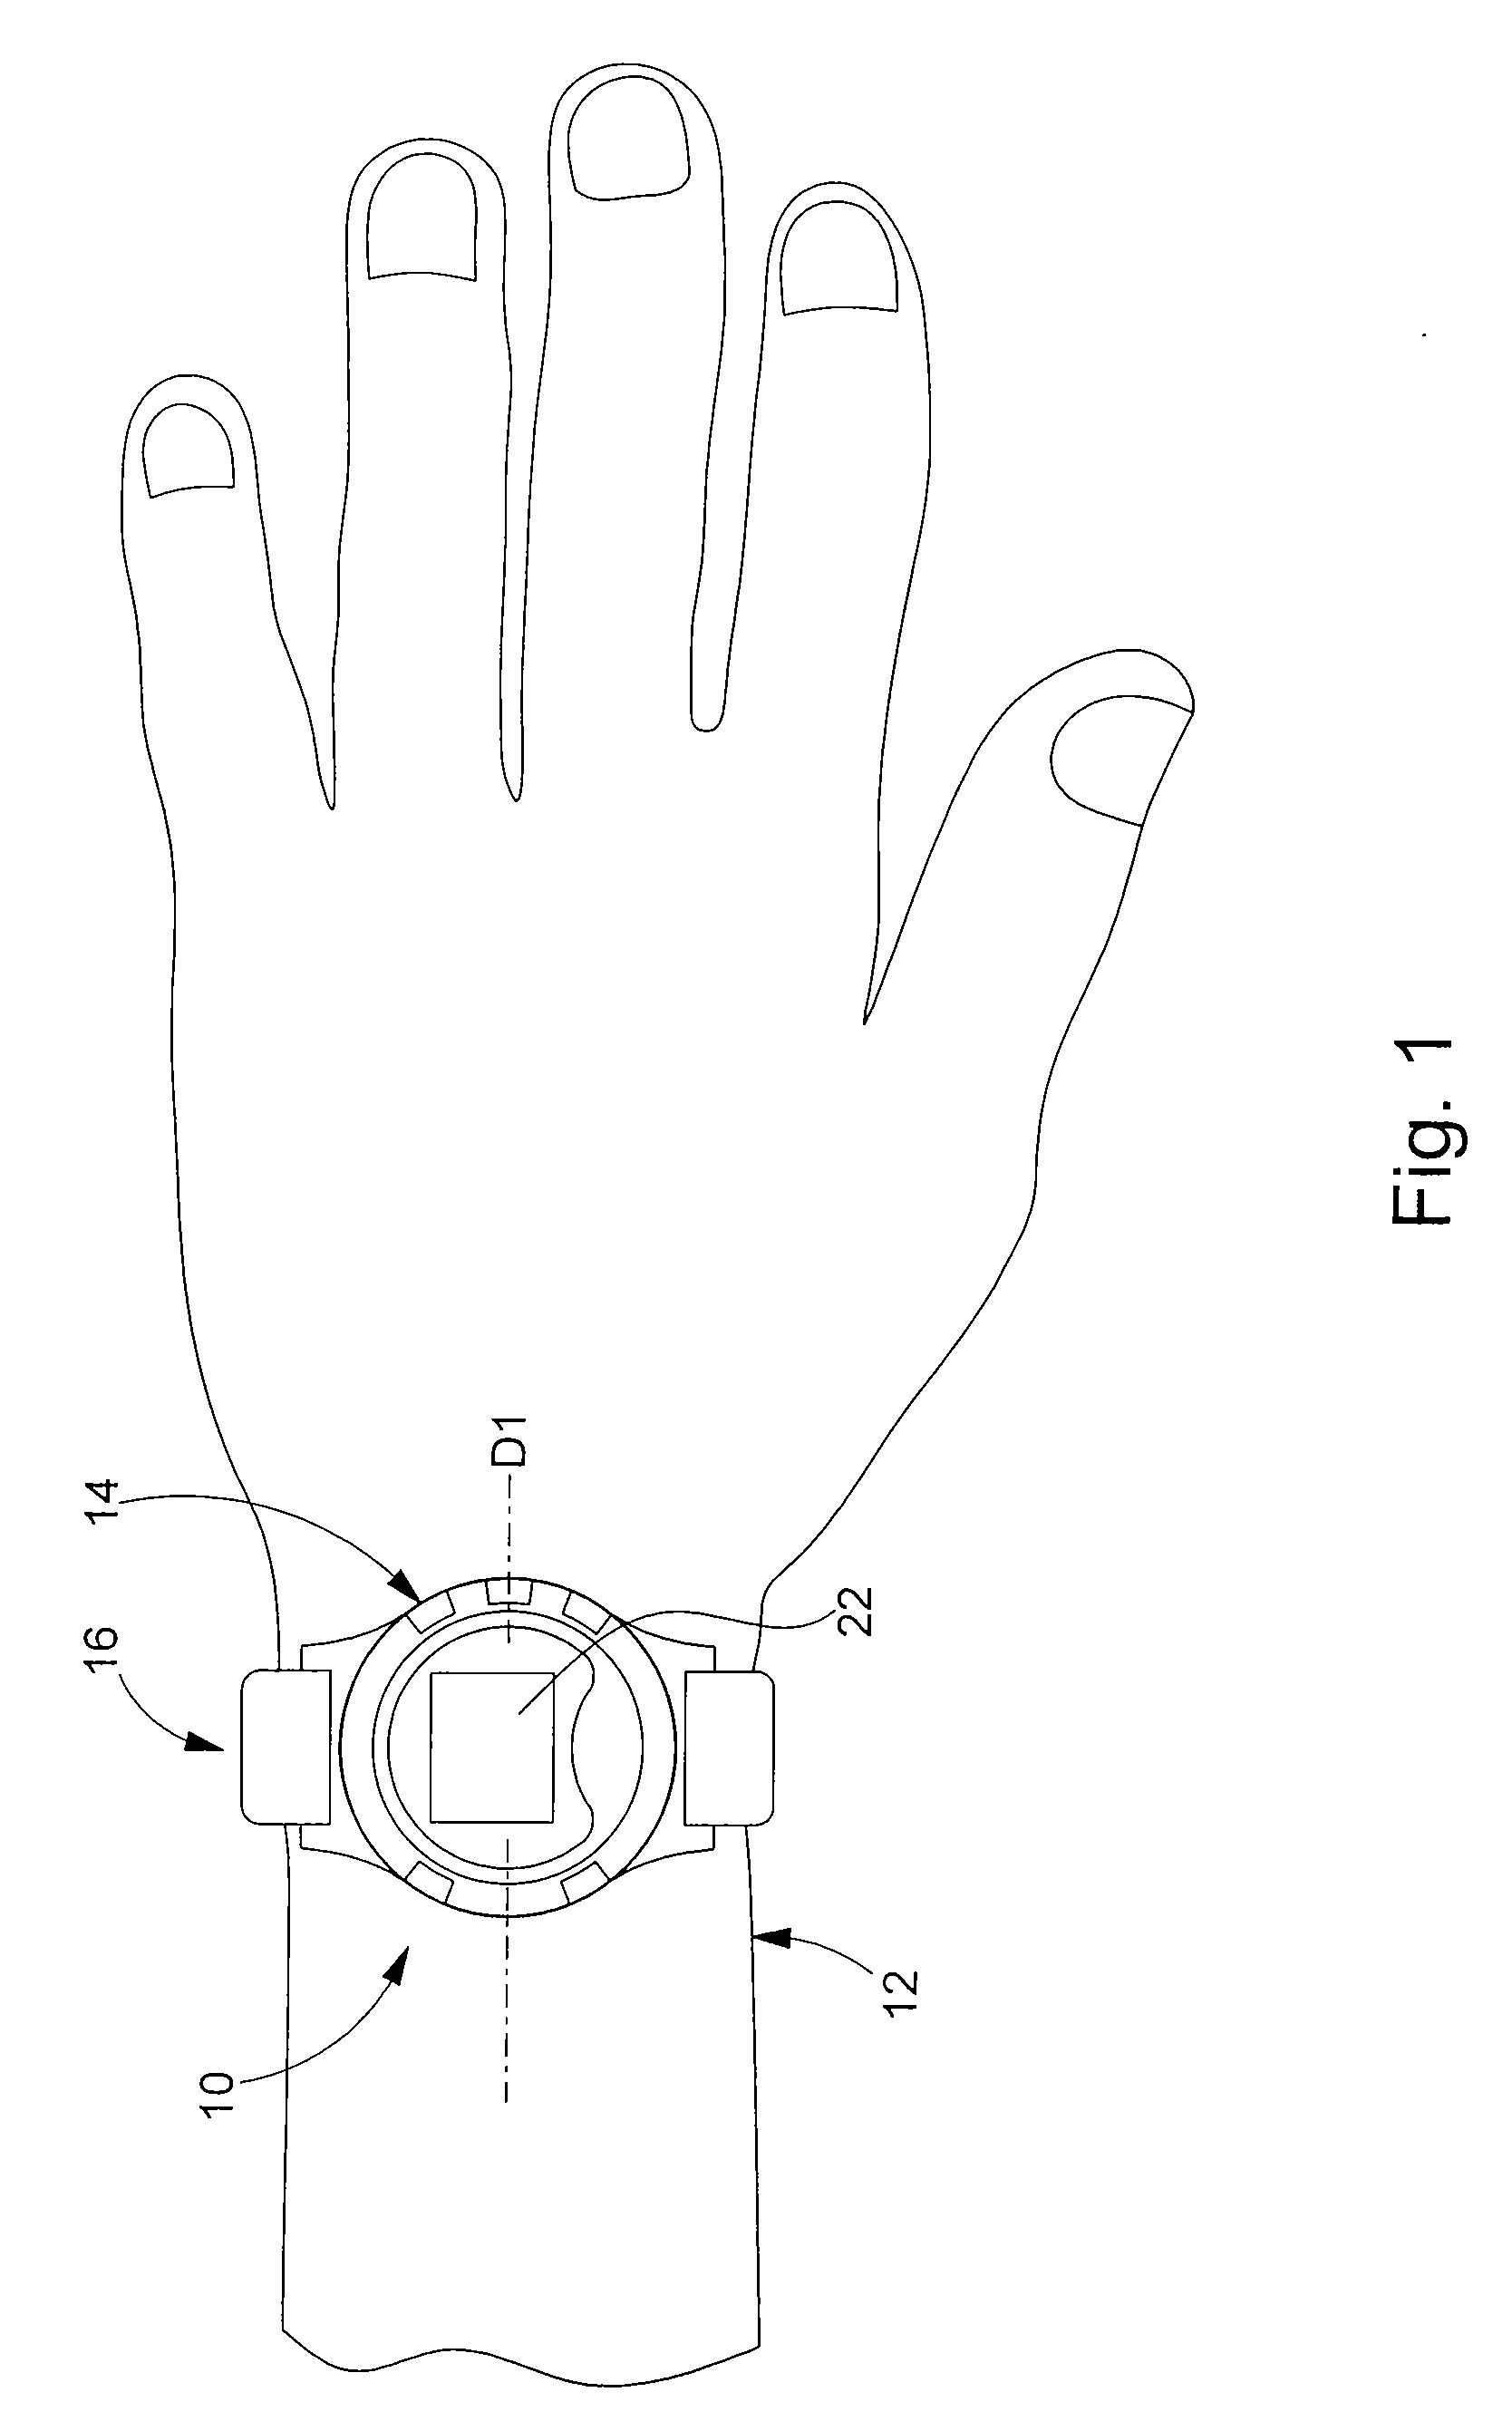 Pulsometer worn on wrist and associated control method